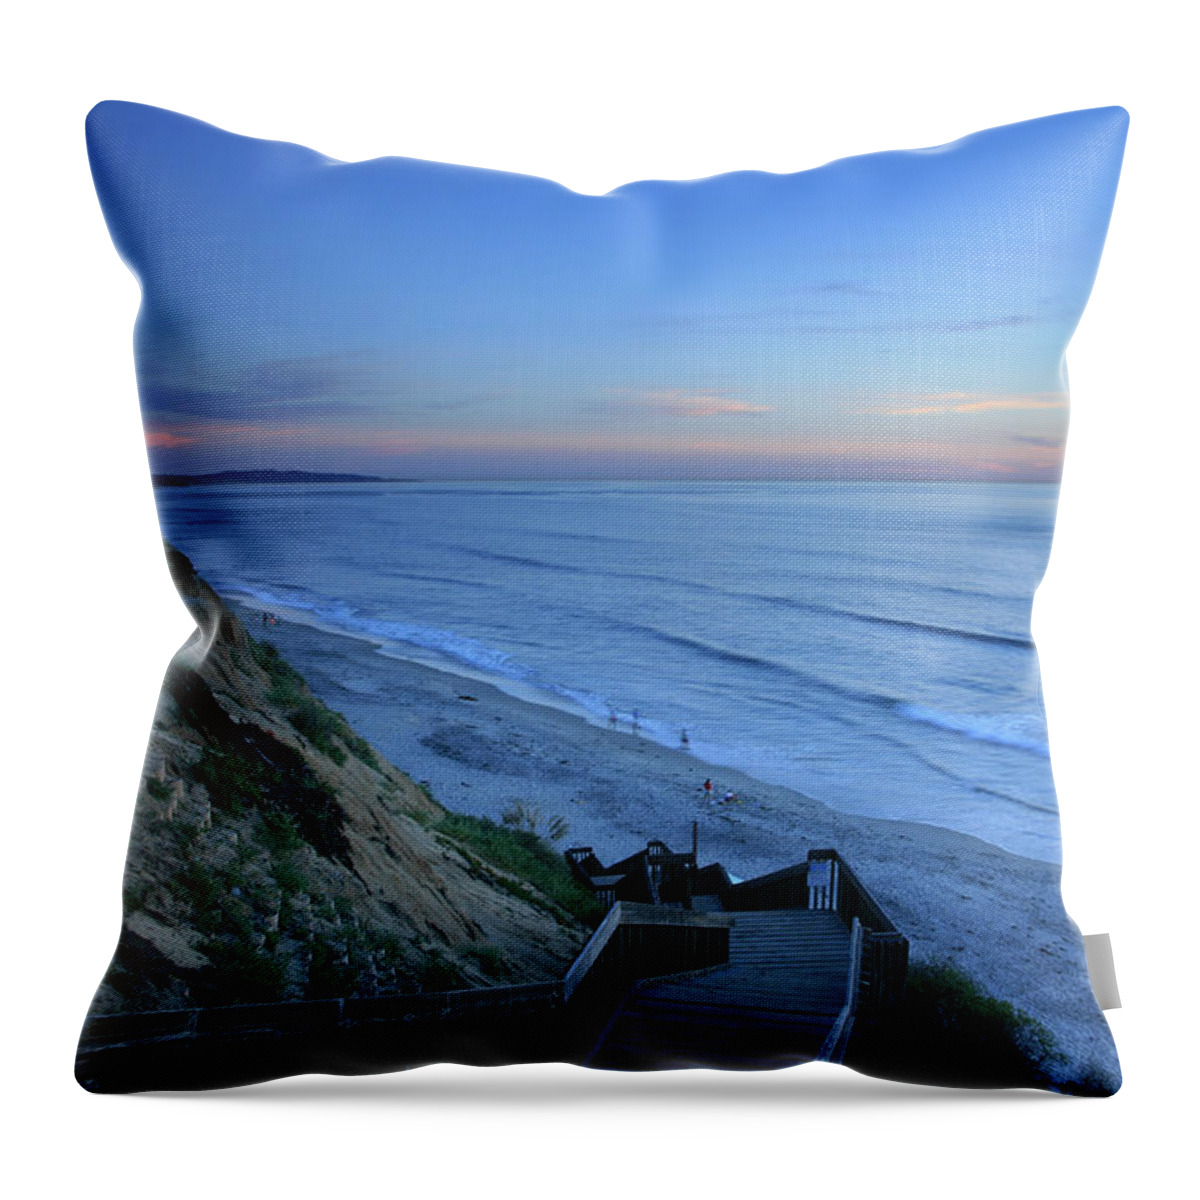  Landscape Throw Pillow featuring the photograph Beach Stairs at Dusk by Scott Cunningham